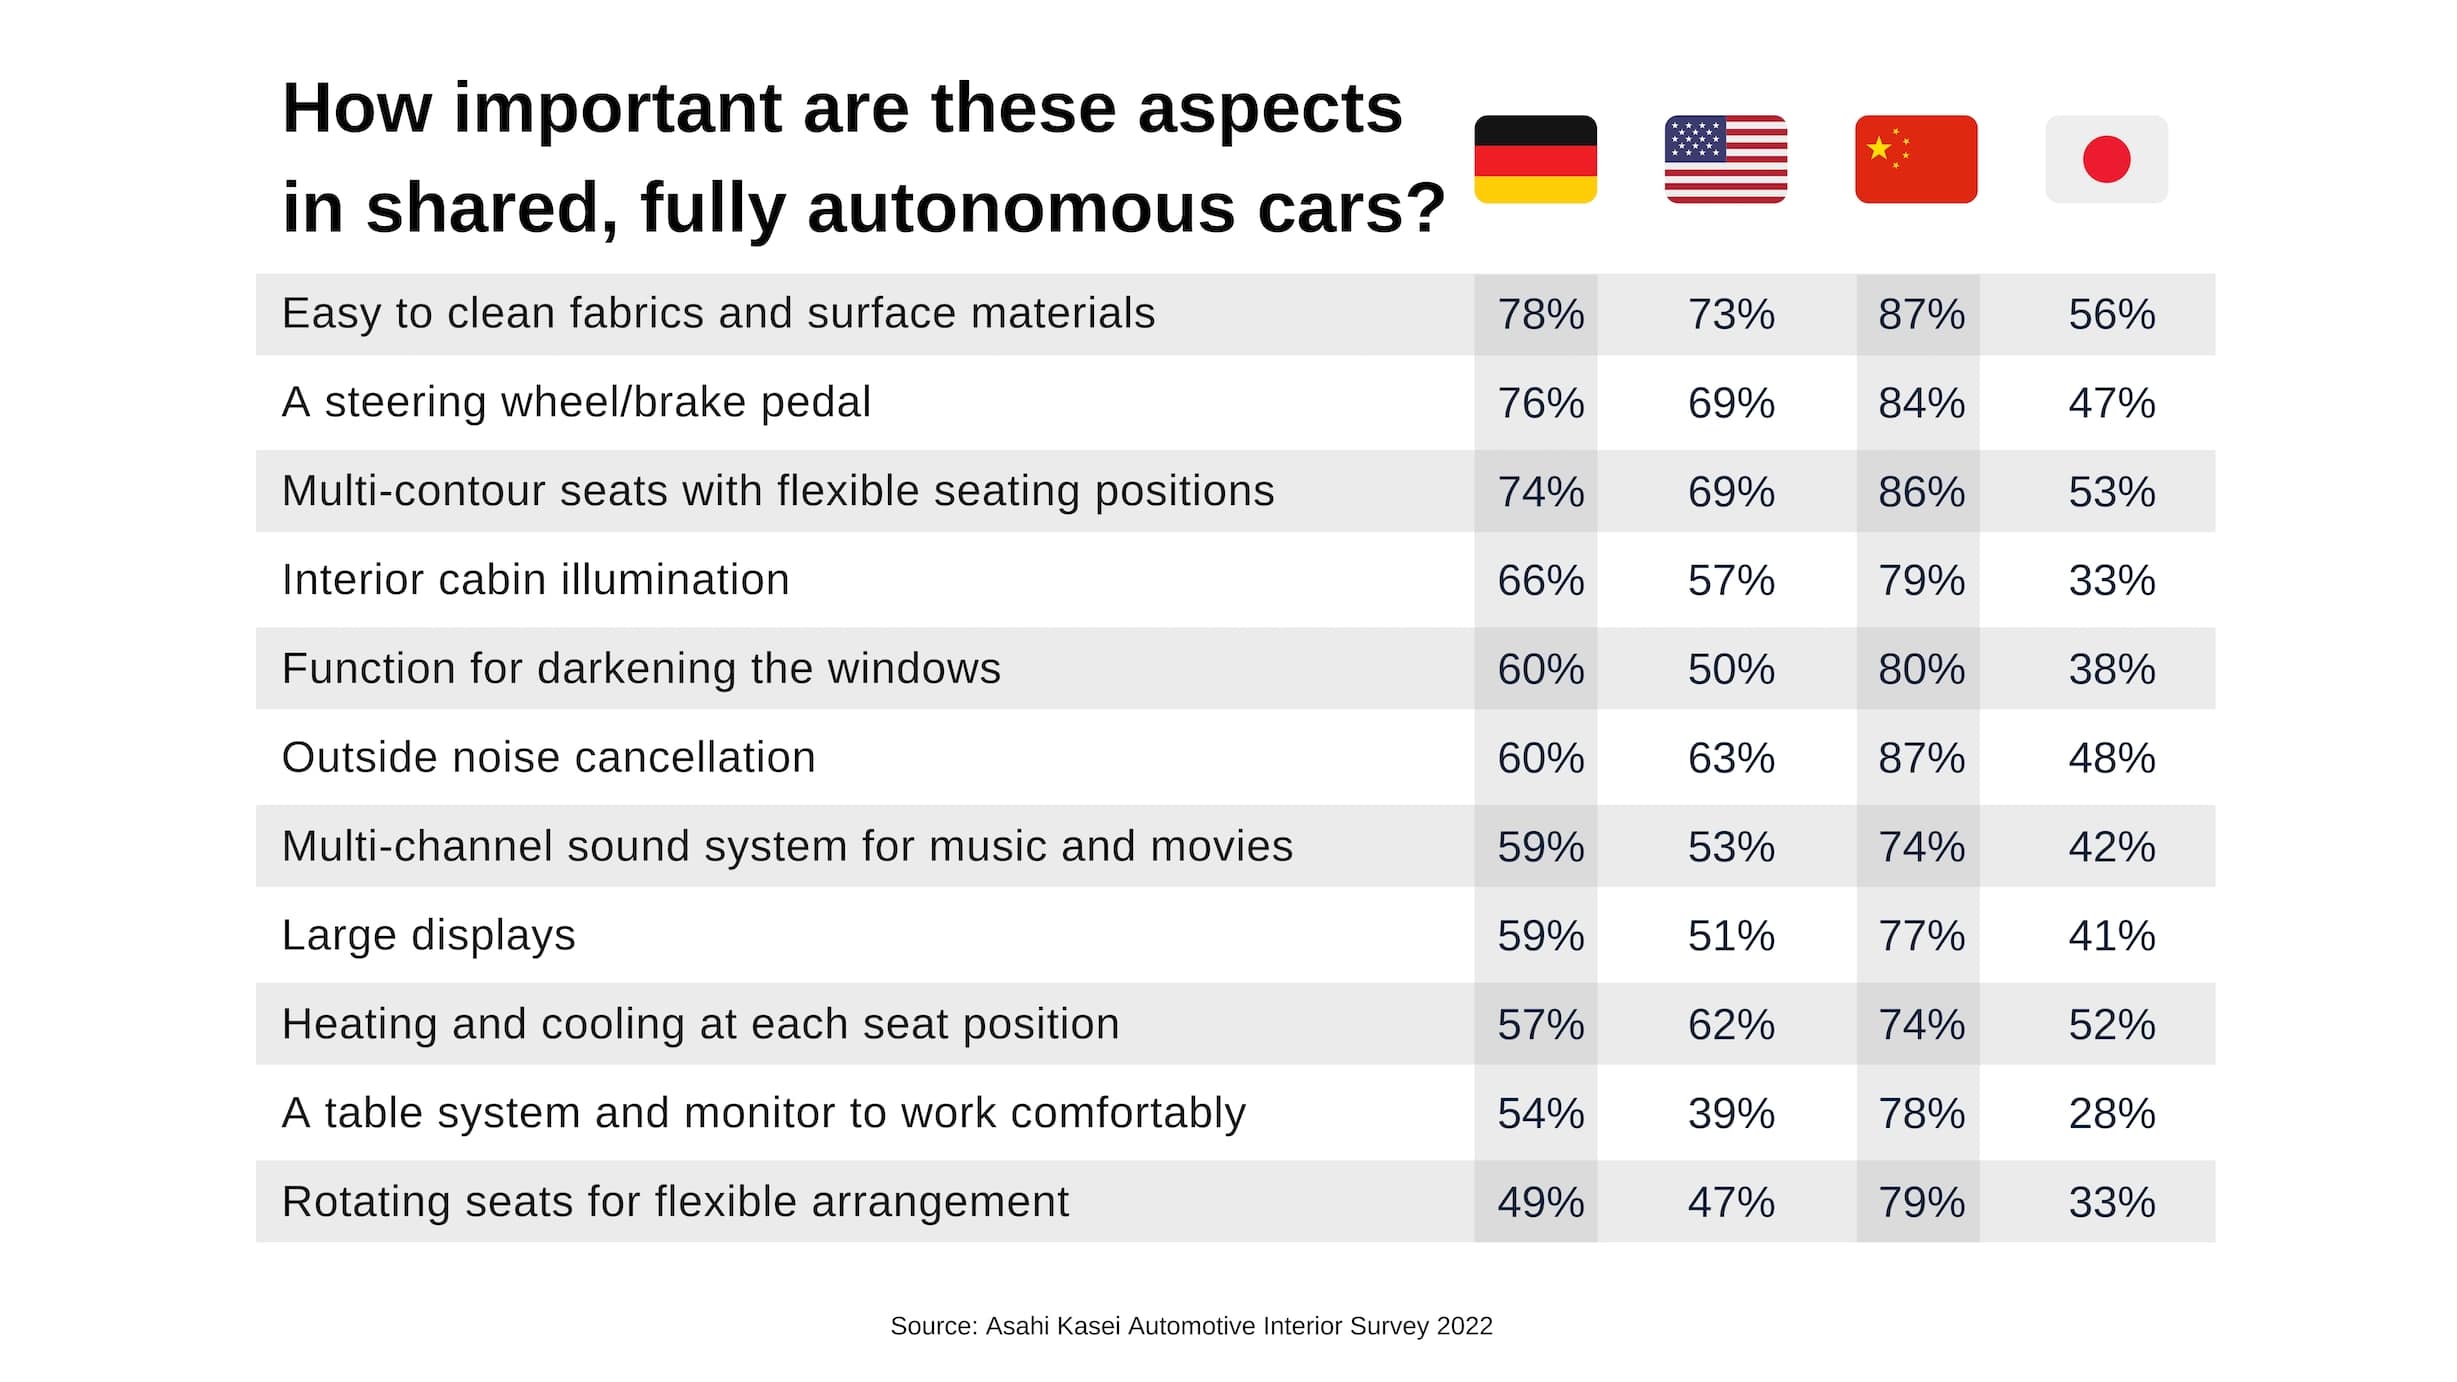 How important are these aspects in shared, fully autonomous cars